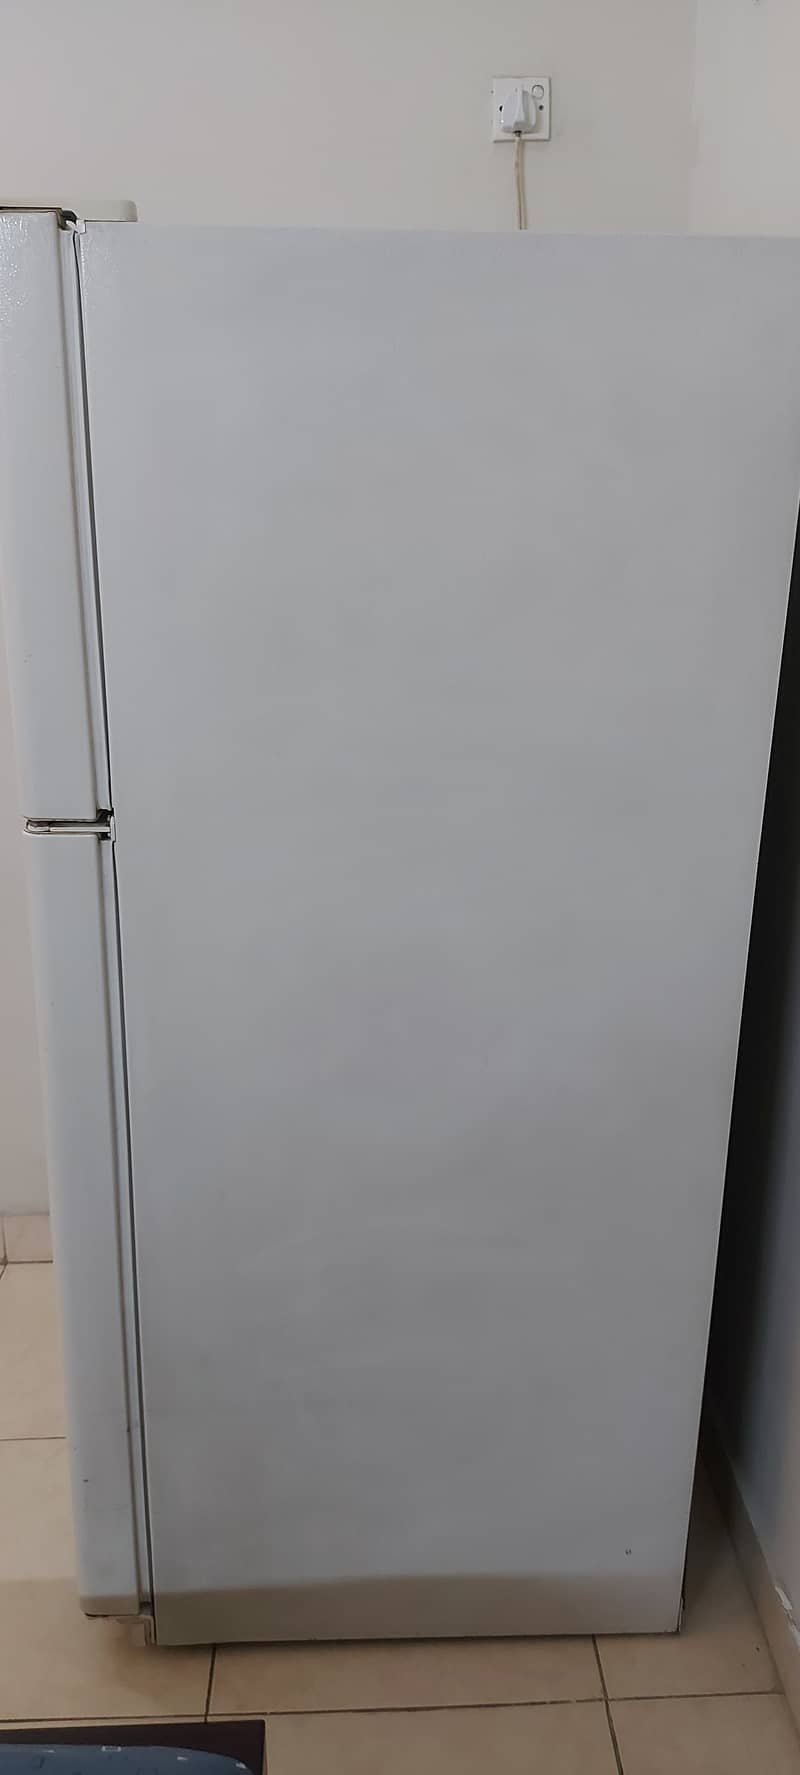 GE Refrigerator Made in Mexico Huge size 615 ltr capacity 22 cu ft 6